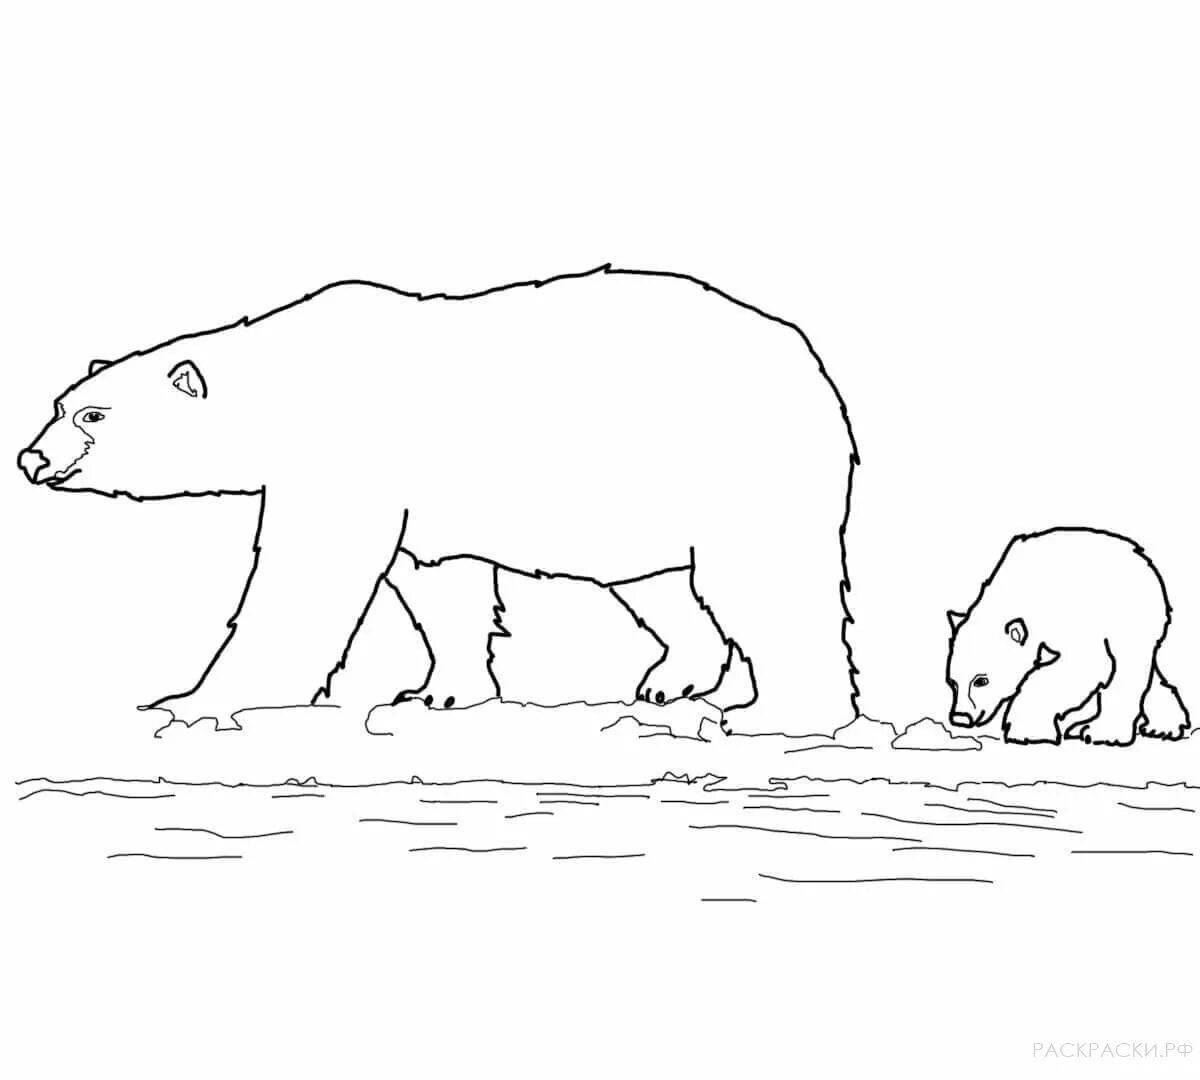 Coloring page amazing bear in the north